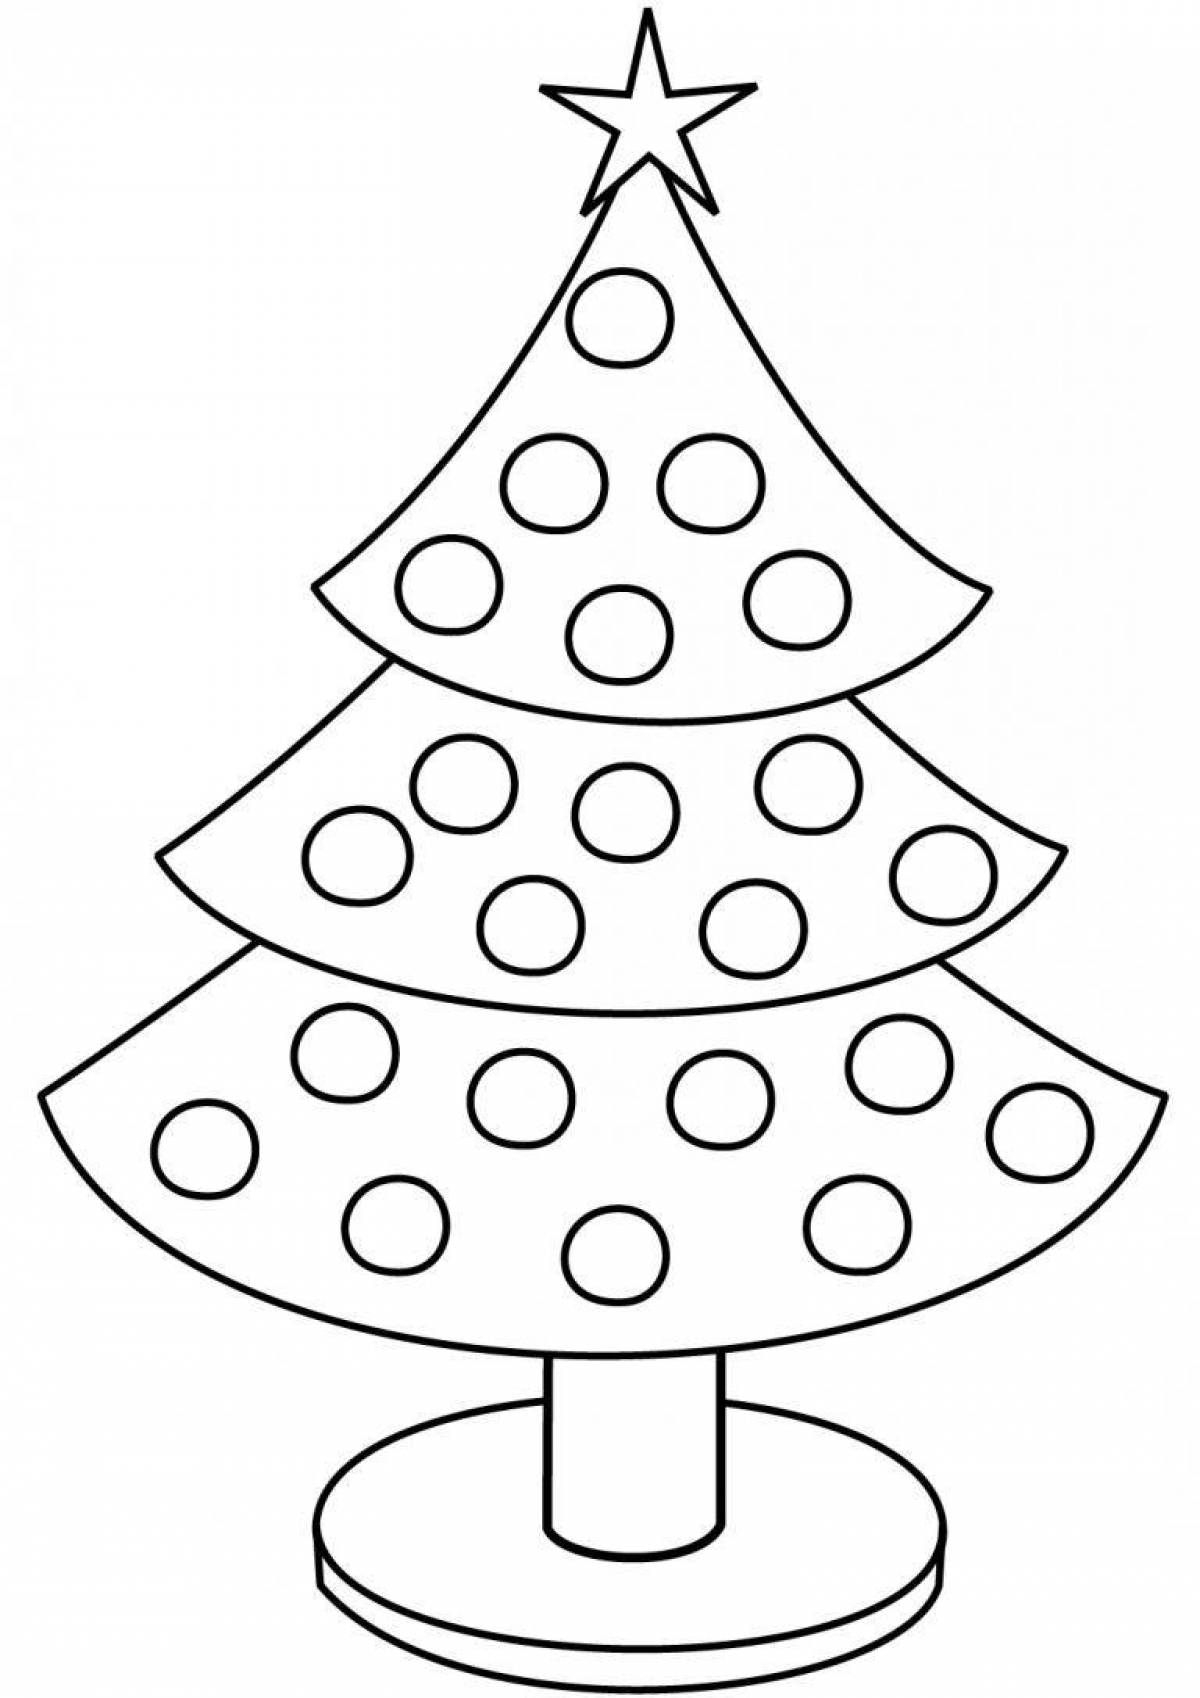 Luxury coloring christmas tree with balls